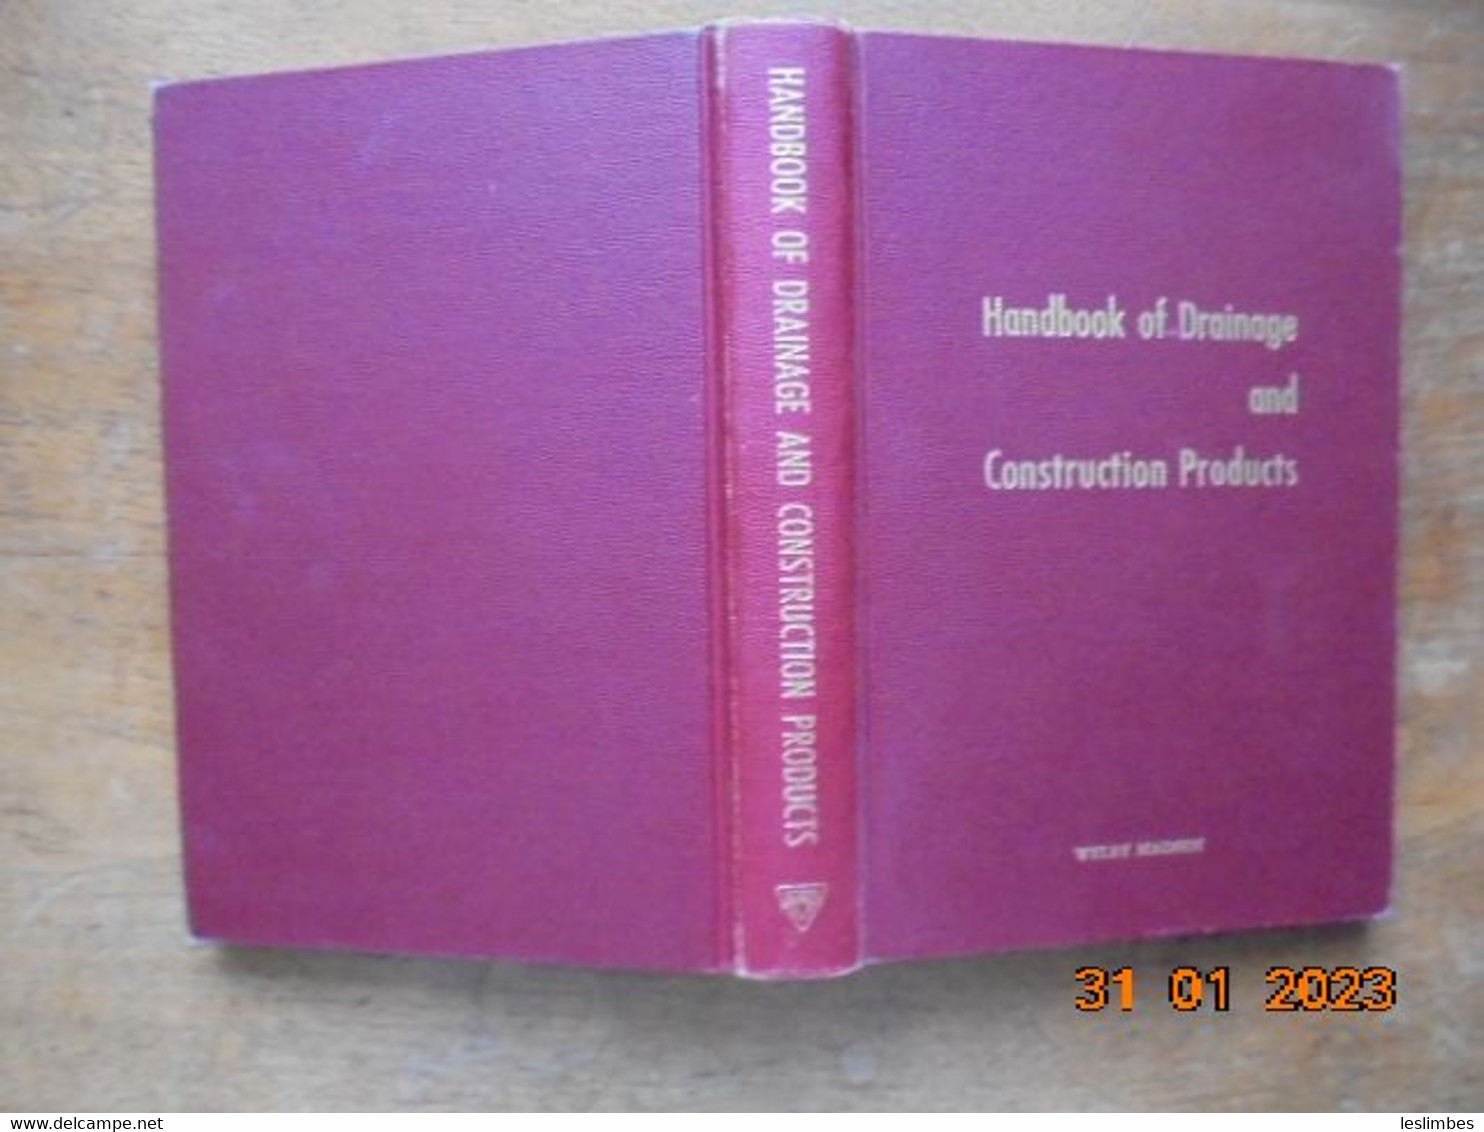 Handbook Of Drainage And Construction Products - Armco Drainage & Metal Products 1955 - Ingenieurswissenschaften